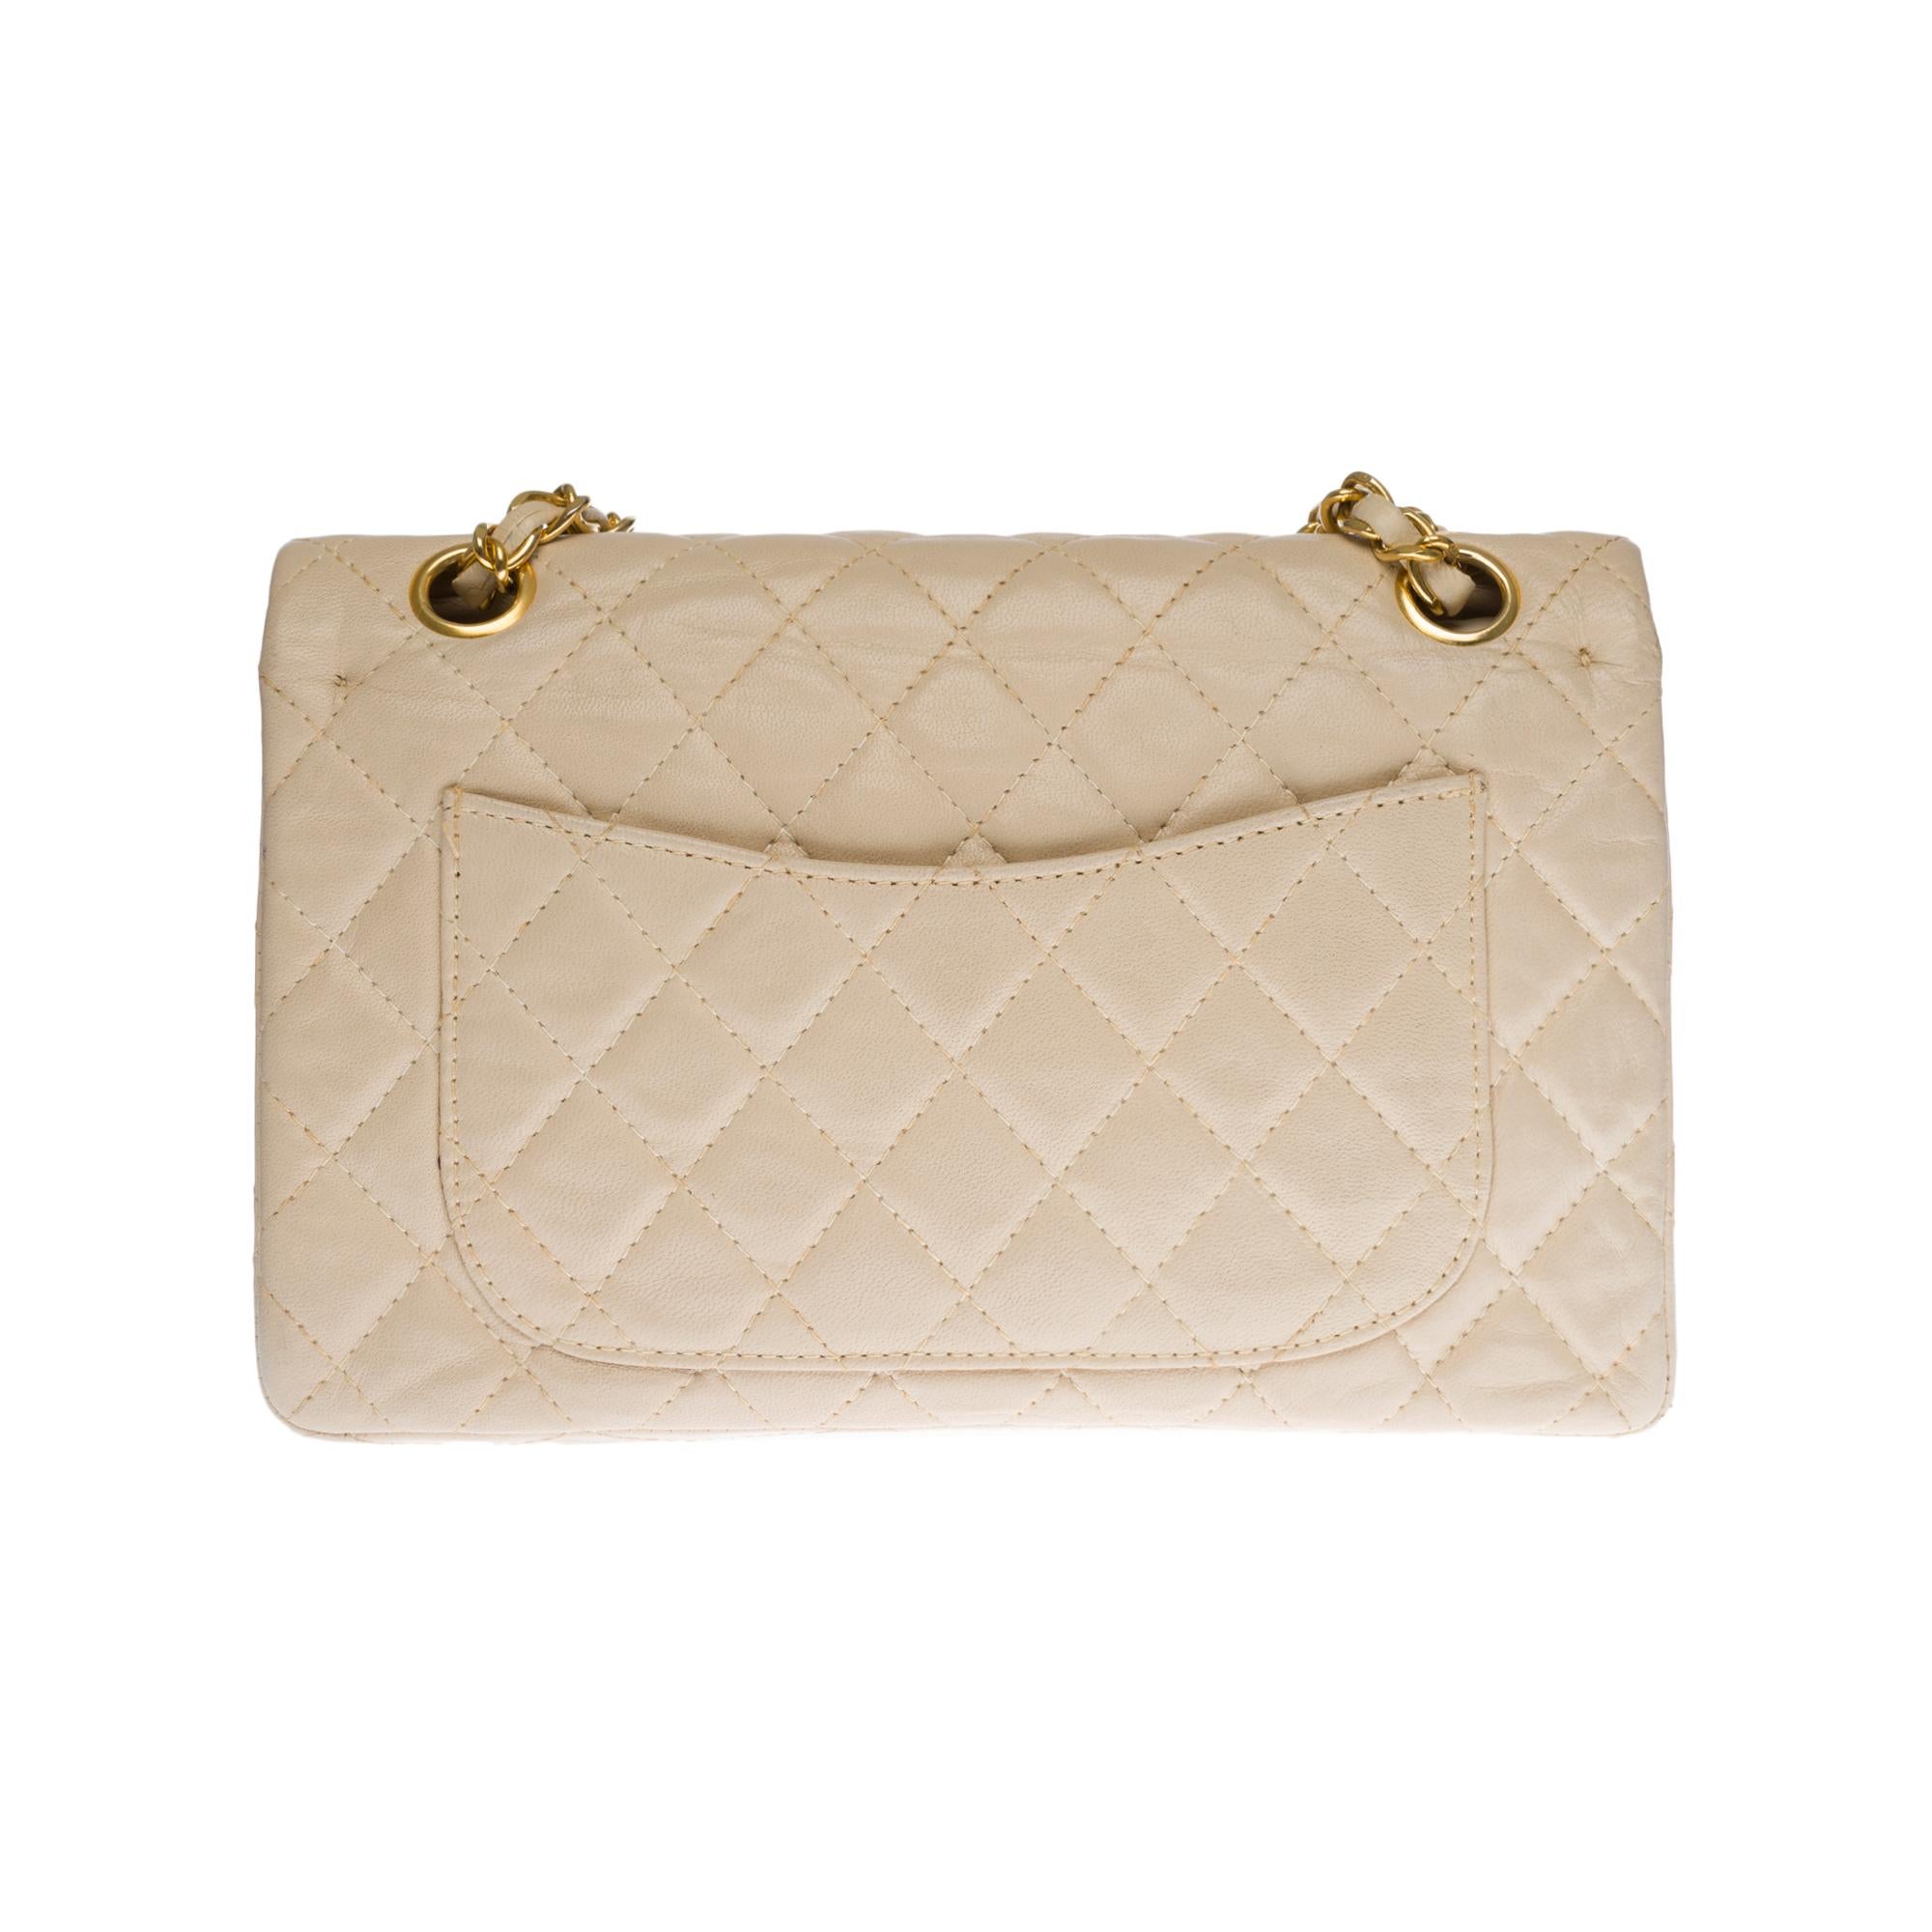 The coveted Chanel Timeless/Classique 22cm shoulder bag double flap in beige quilted lambskin leather, gold metal hardware, a golden metal chain handle intertwined with beige leather allowing a hand or shoulder support
Closure with gold metal flap
A